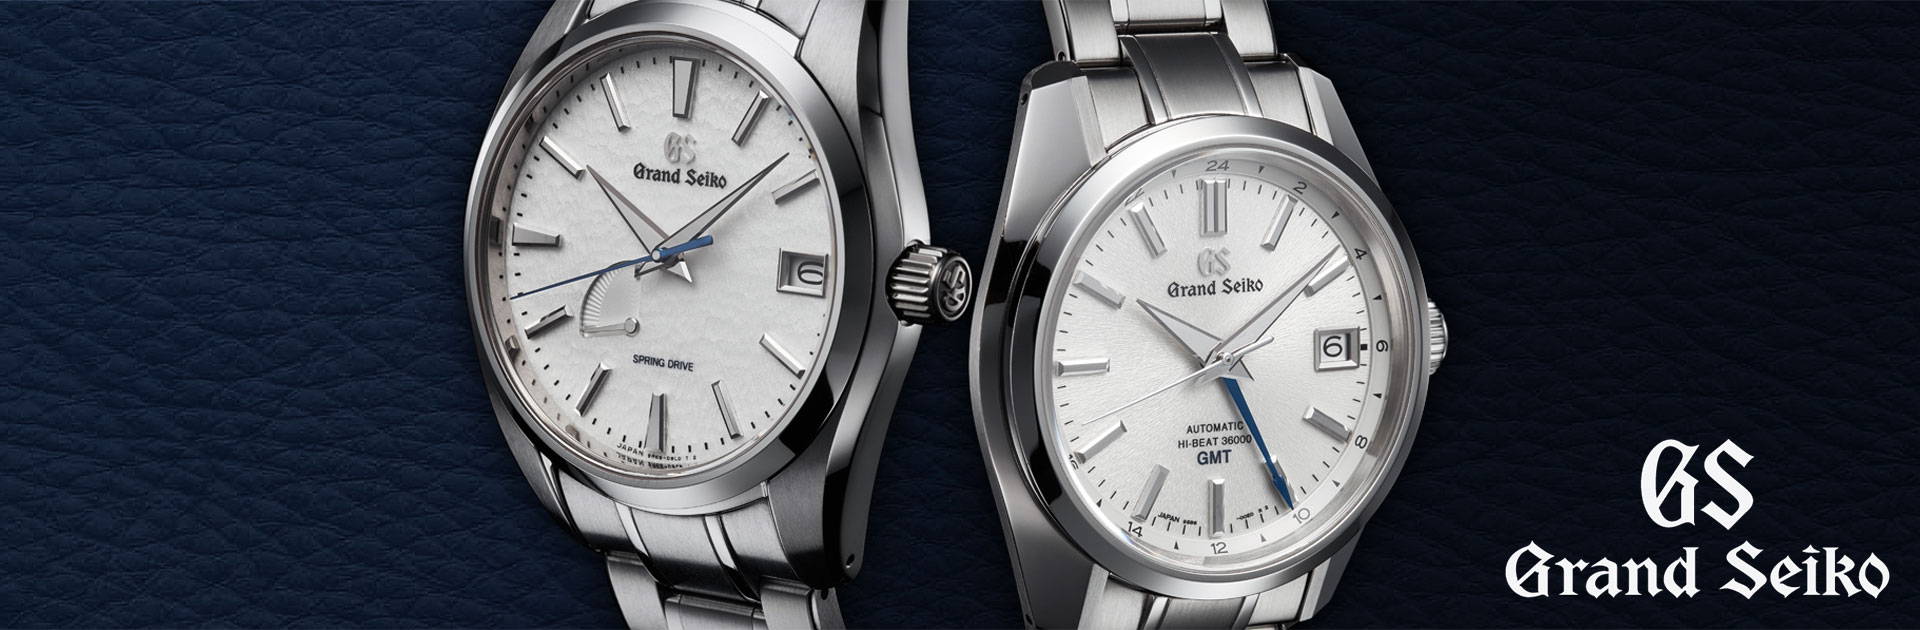 Grand Seiko Watches For Sale - Authorized Dealer – Moyer Fine Jewelers